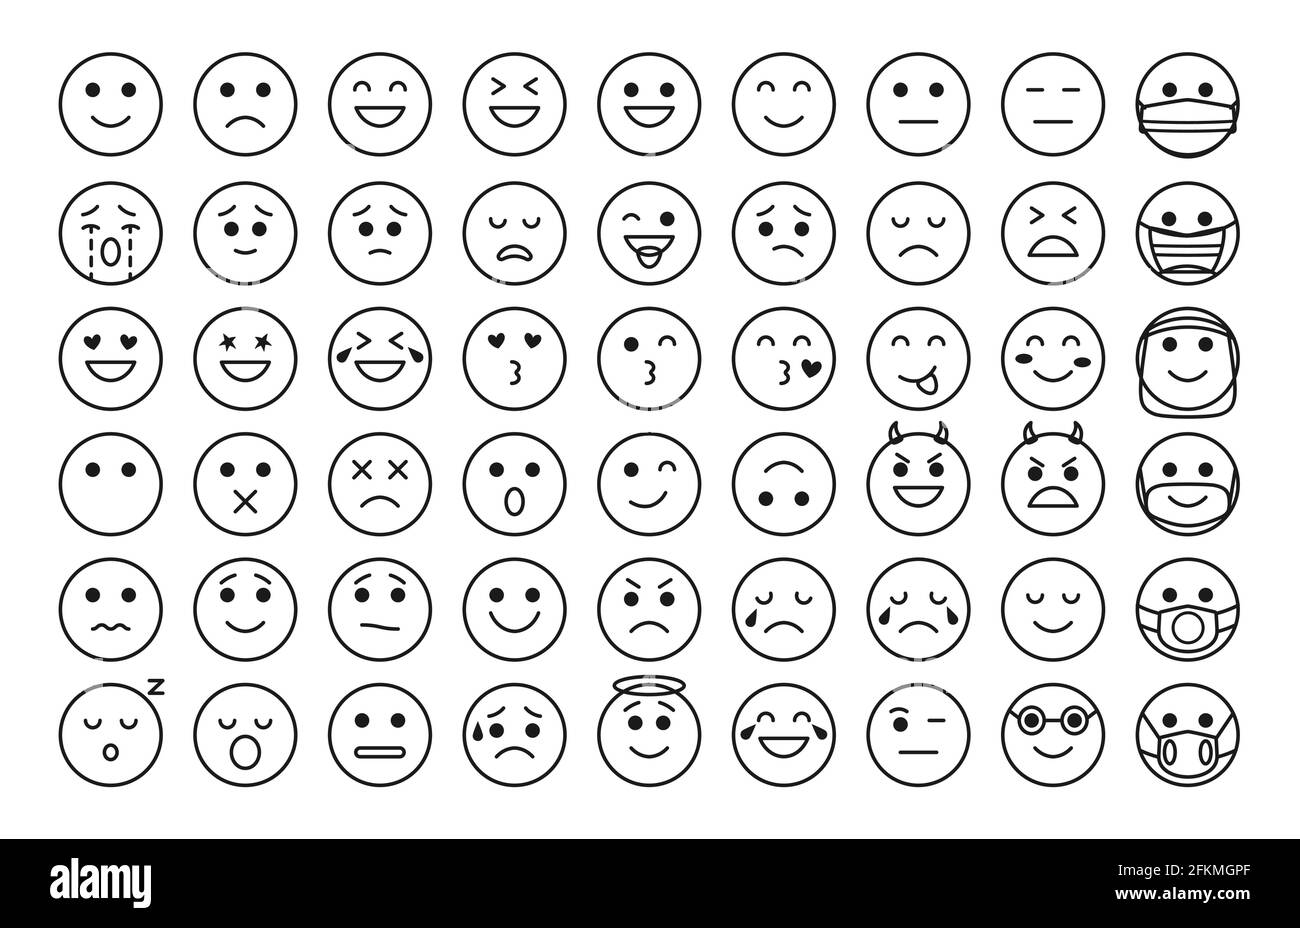 Black outline funny emoji icons set. Mood or facial emotion symbol for chat app or web. Linear face expressing crazy, funny, sad, angry. Contour emoticons in mask Isolated on white vector illustration Stock Vector